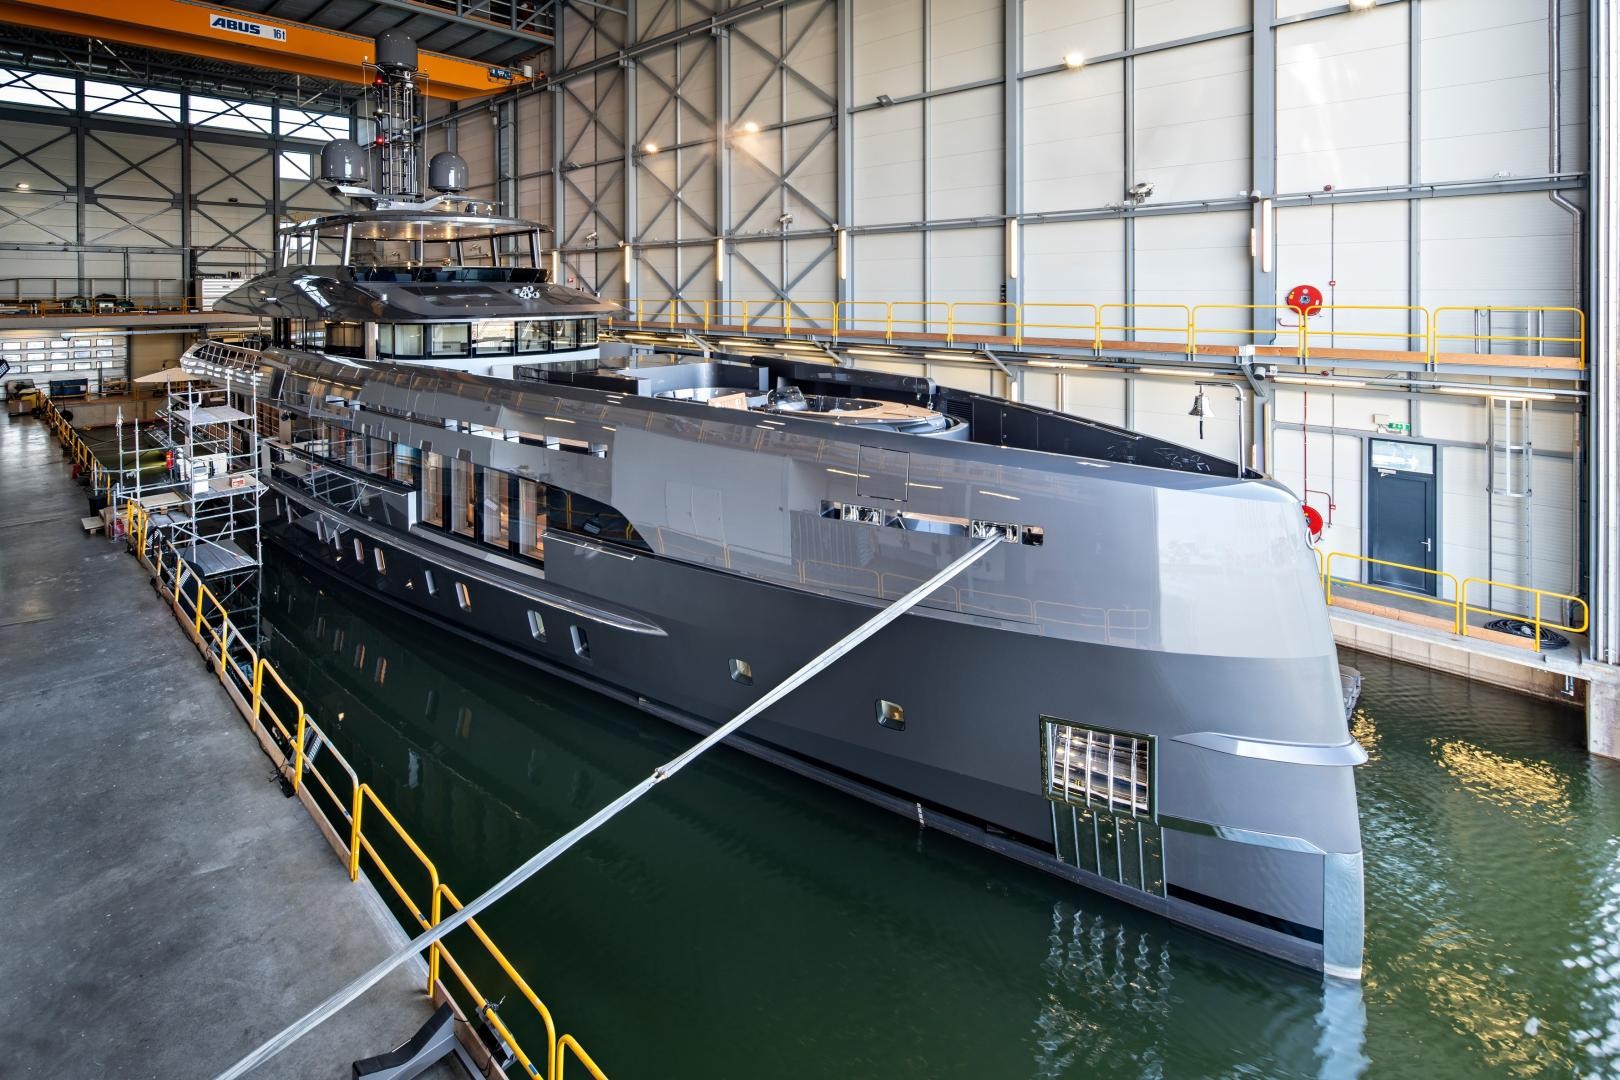 Heesen launches YN 18650 Project Boreas, 50m full-aluminium Fast Displacement Hull Form